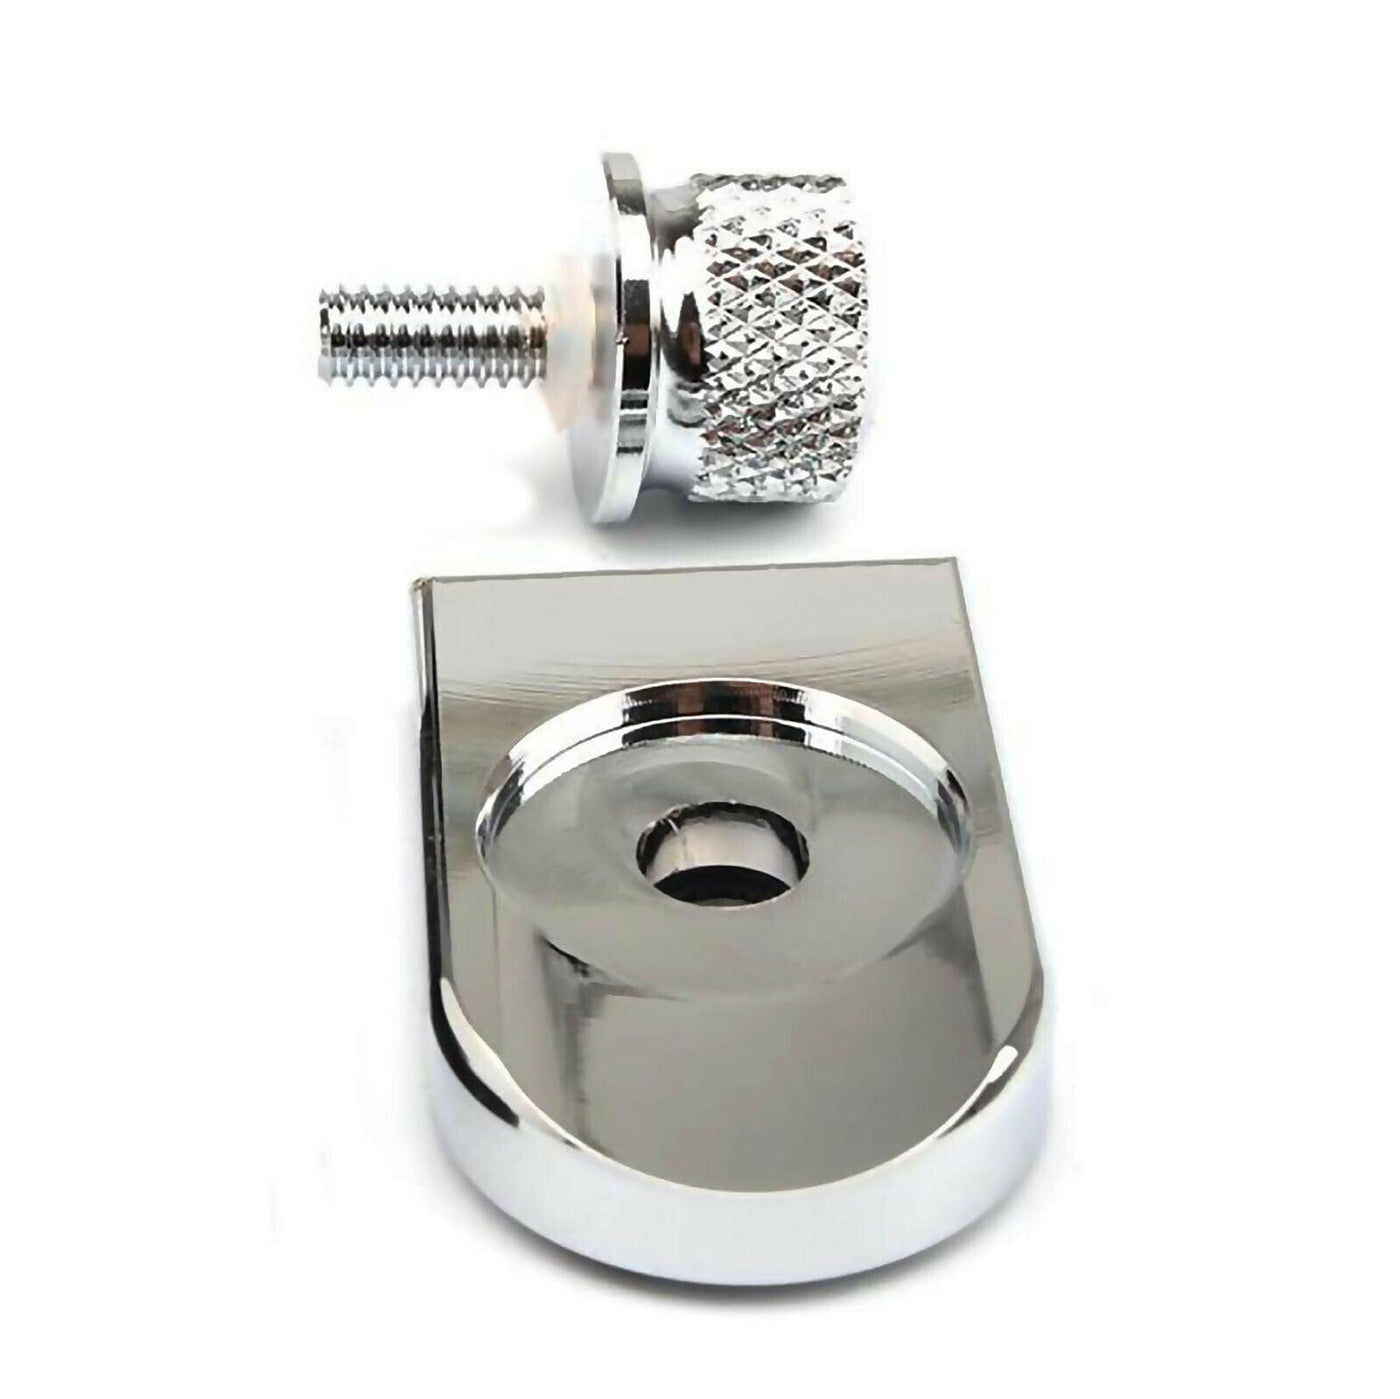 Fit for Harley Davidson 1996-2016 Aluminum Seat Bolt Mount Knob Cover Chrome - Moto Life Products